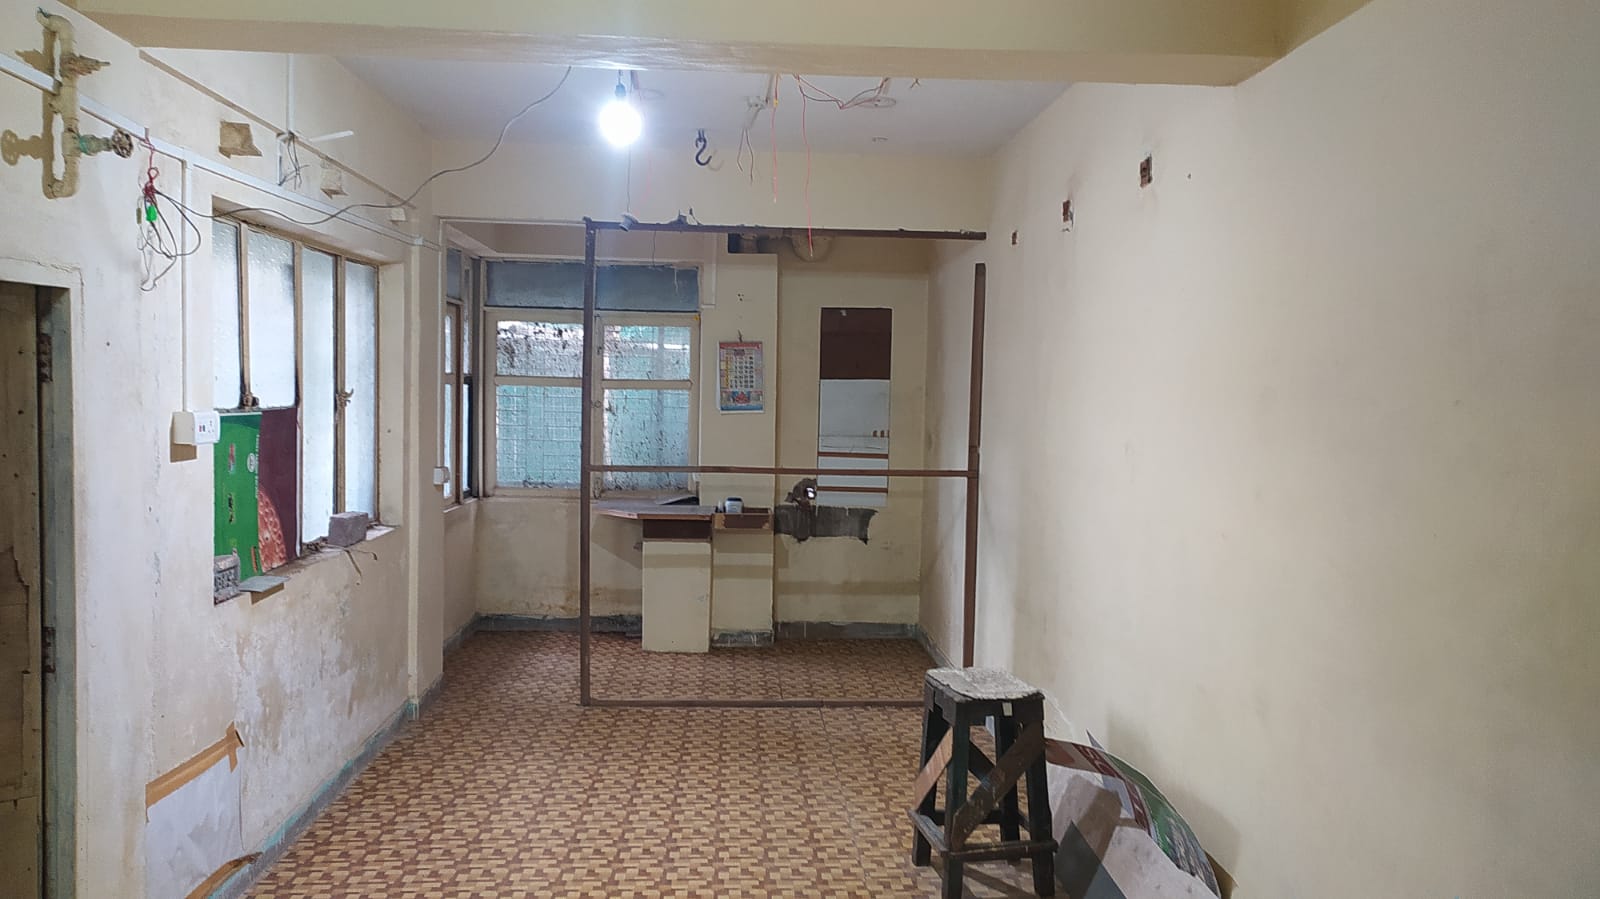 325 Sq Feet Office Space for Rent Only in Park Street area